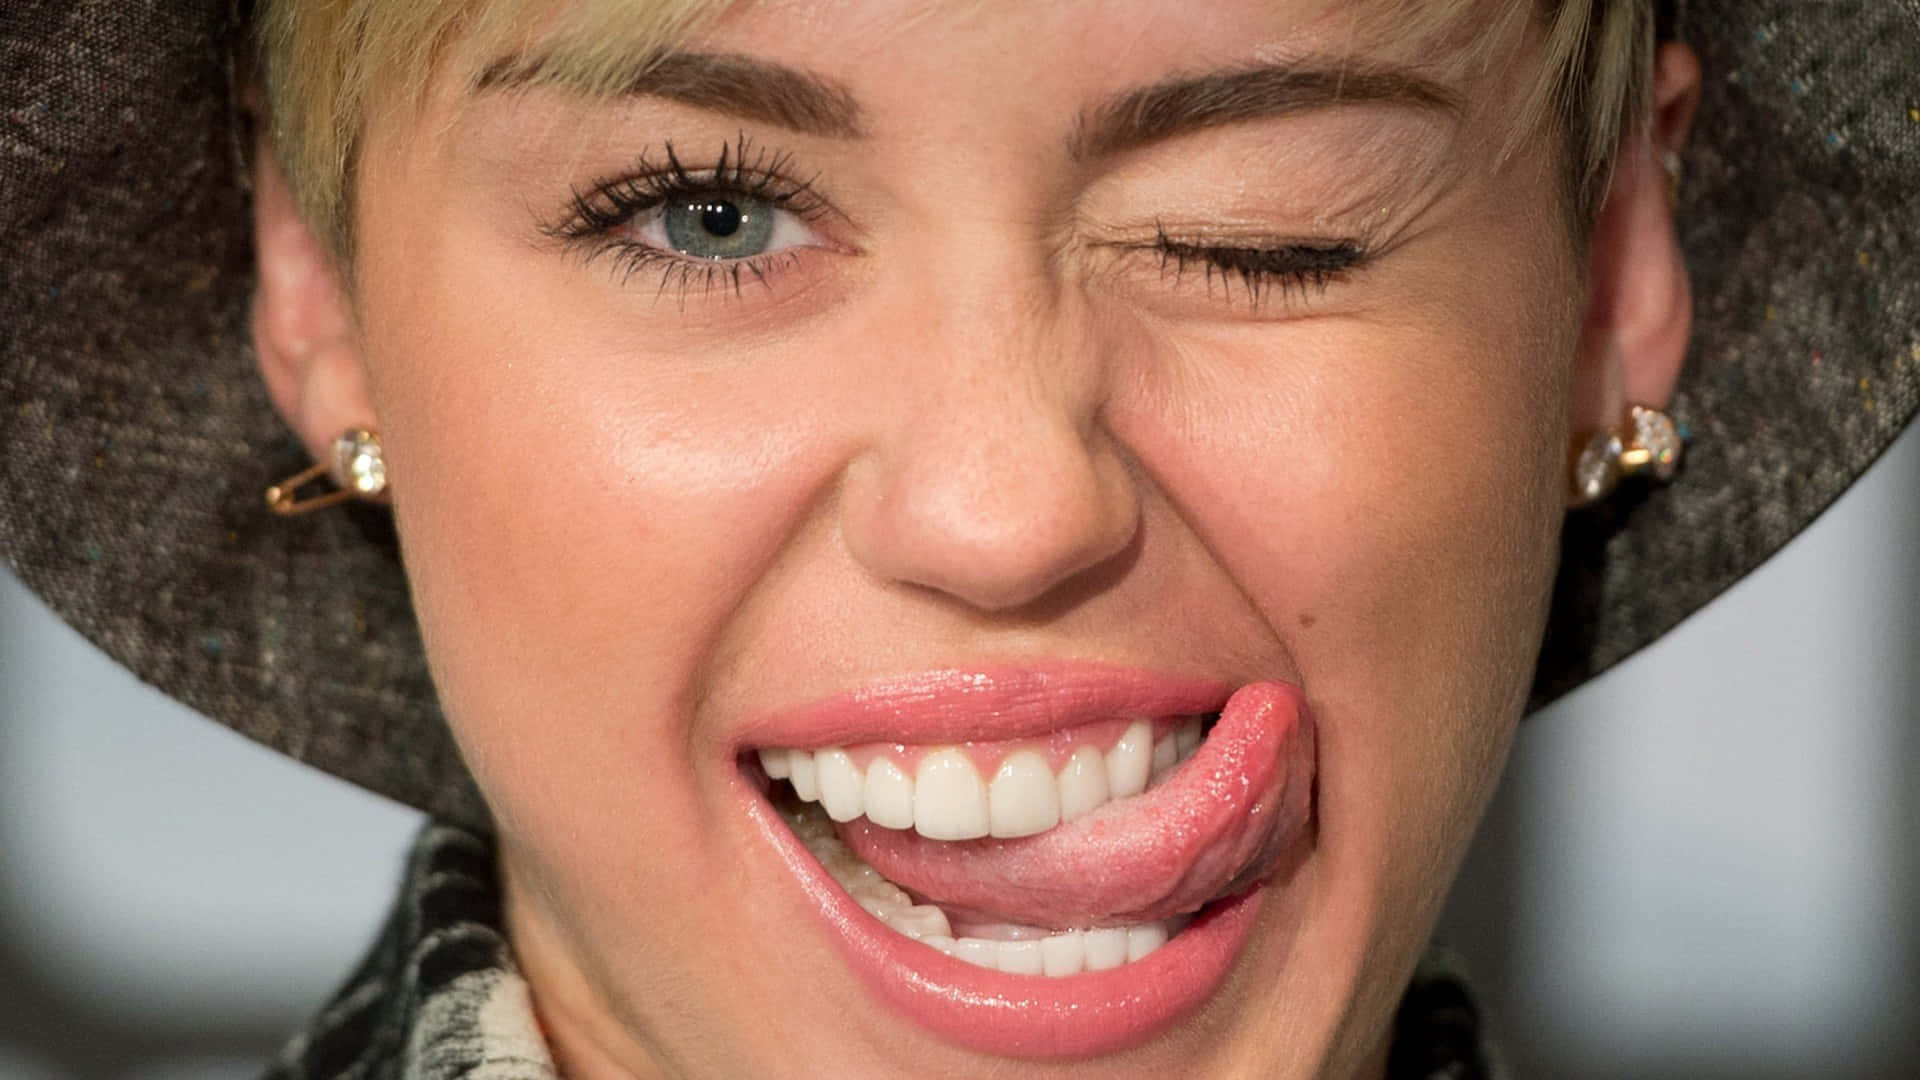 Miley Cyrus Caught In An Embarrassing Moment Wallpaper